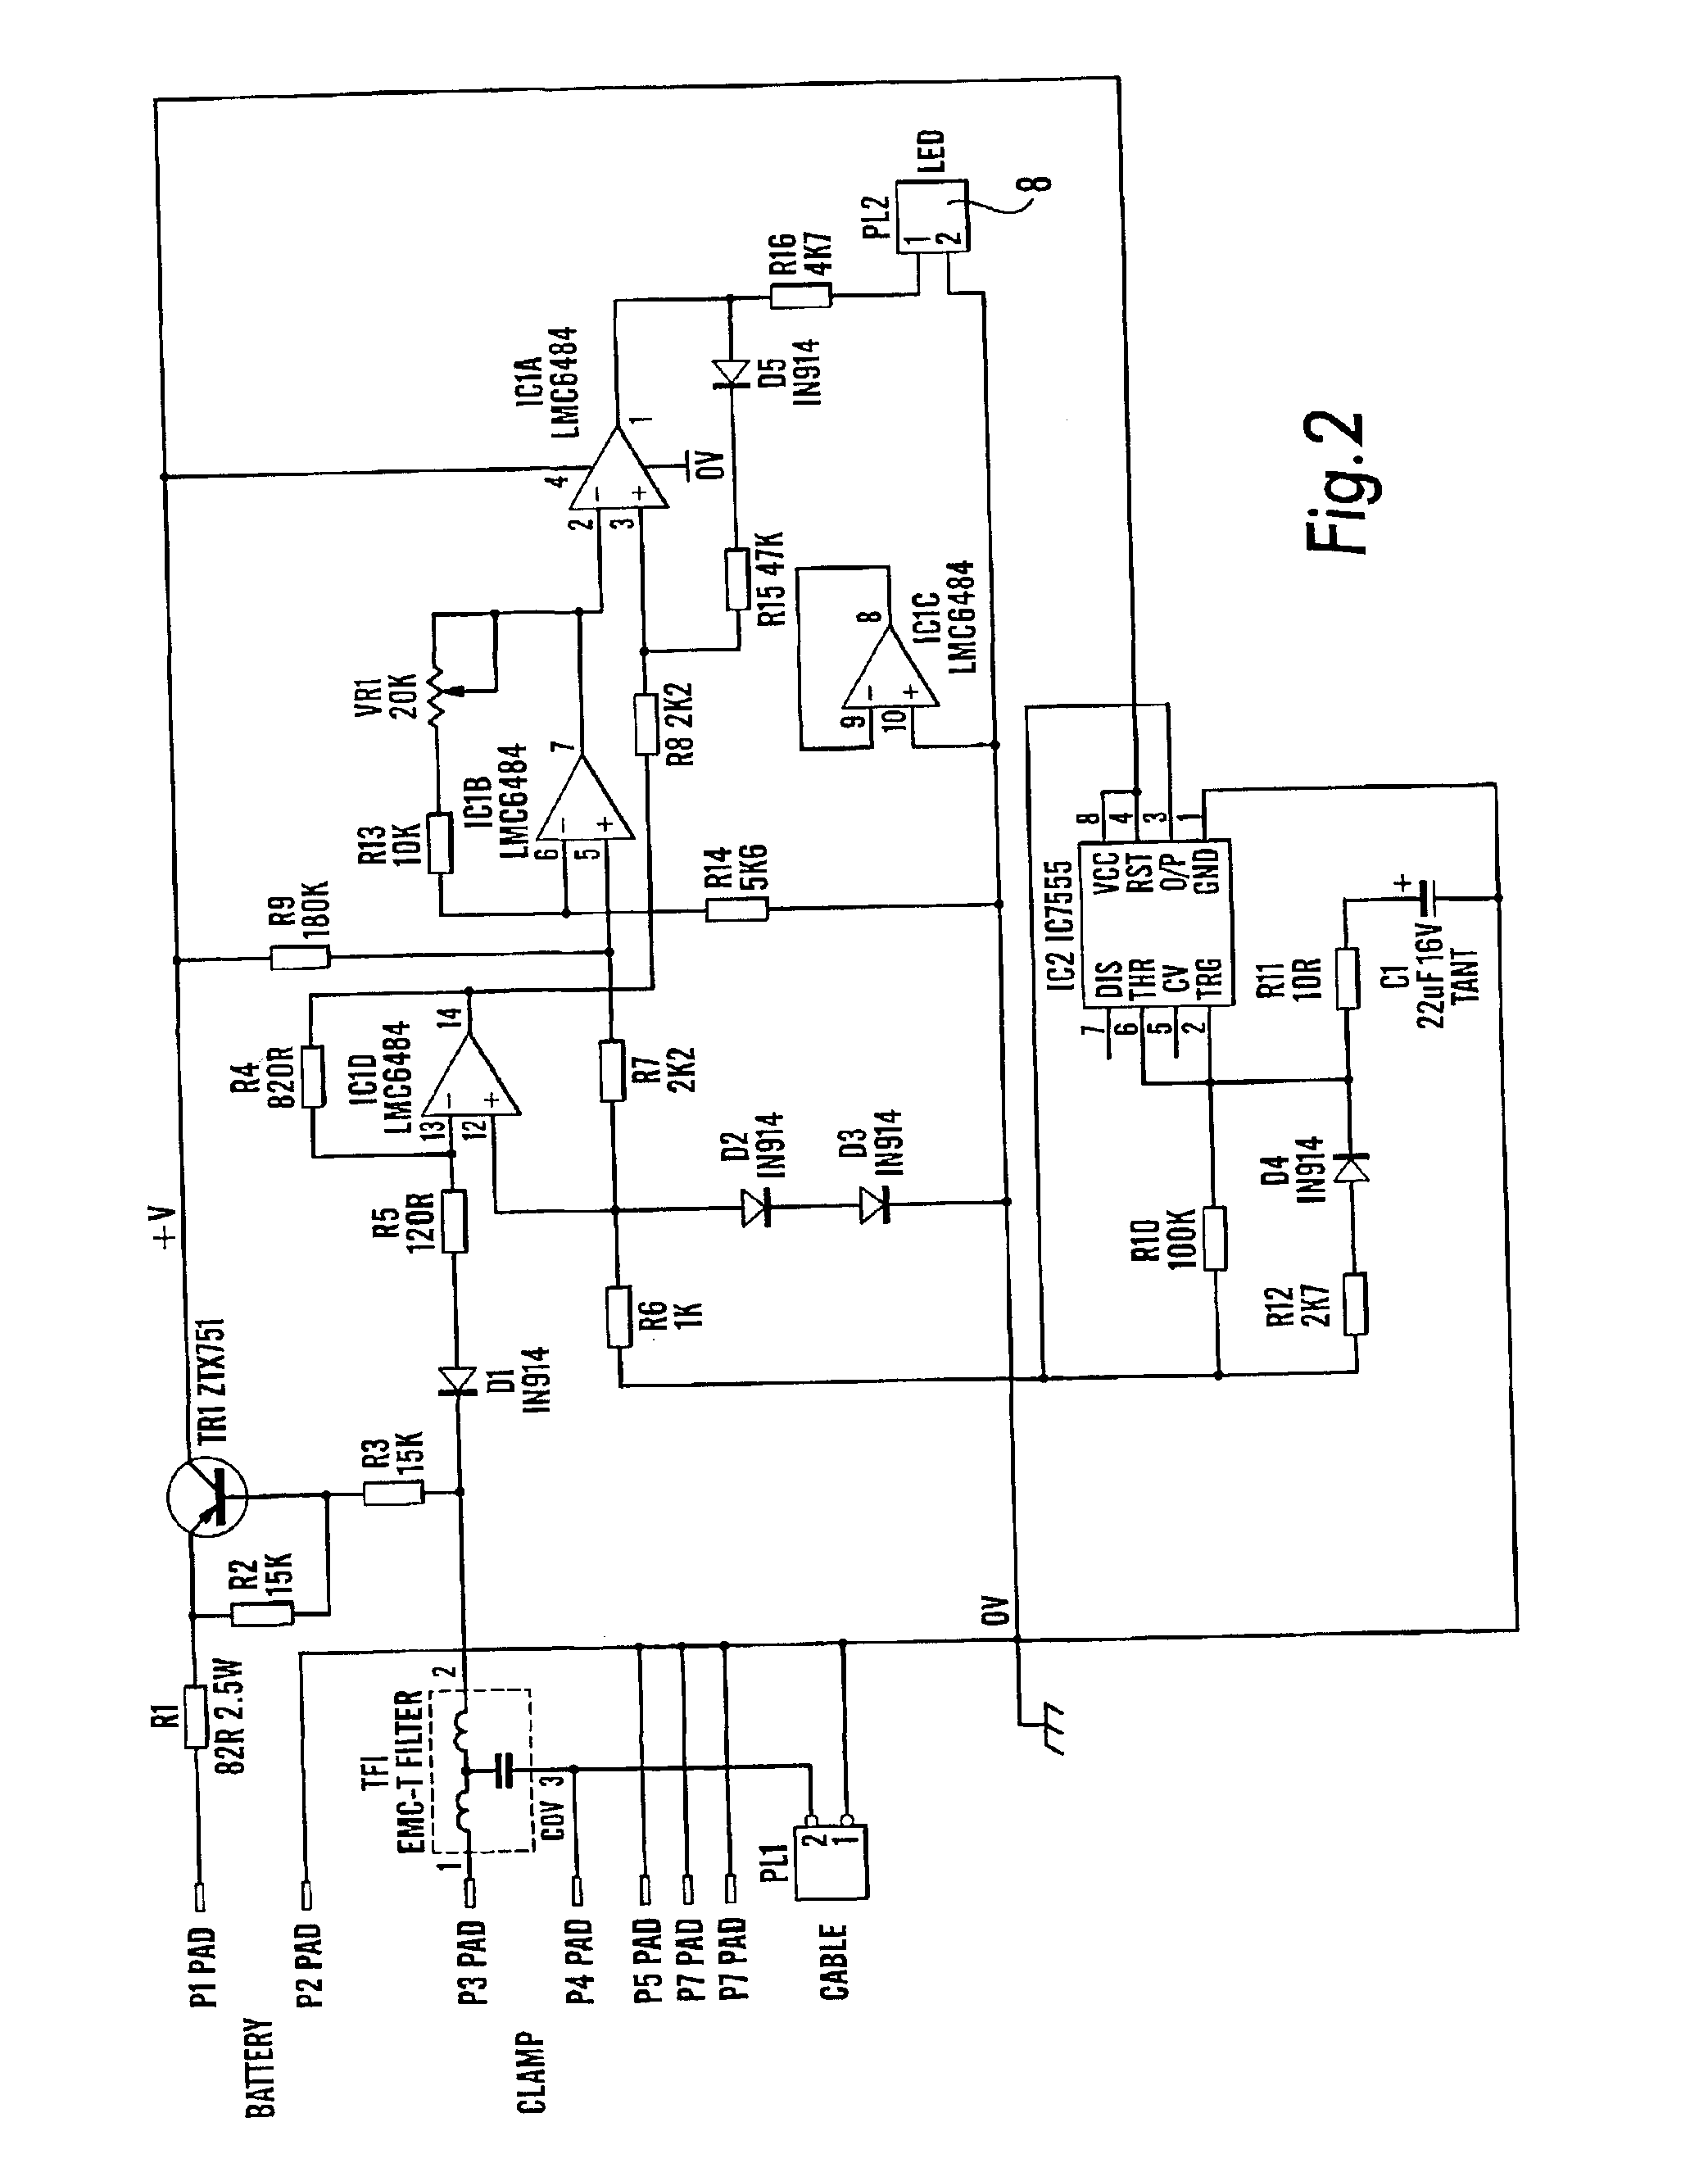 Electrical resistance monitoring device